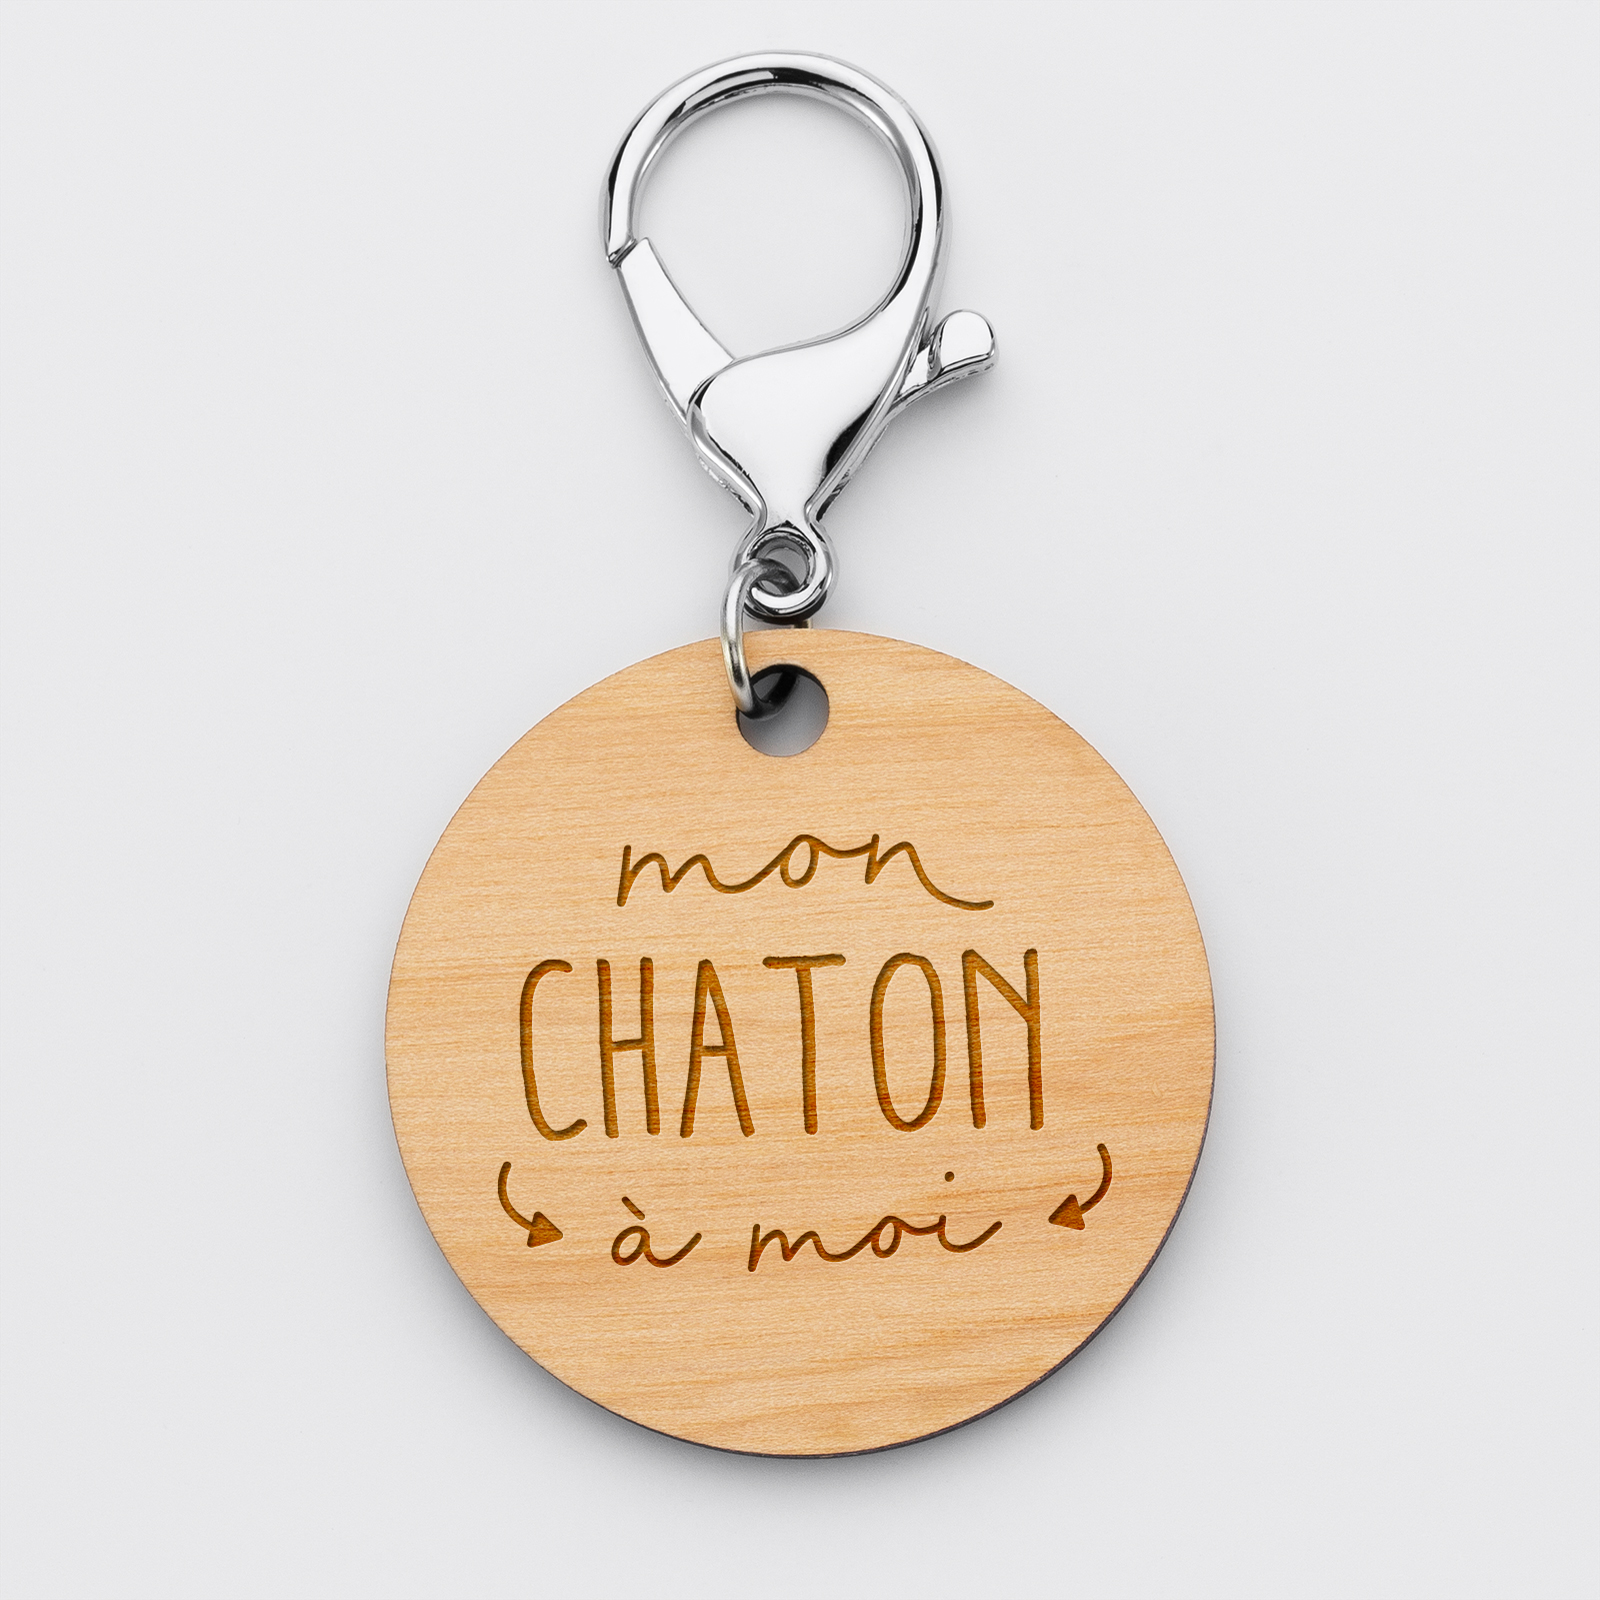 Personalised engraved wooden "Male nickname" round medallion keyring 50mm 1